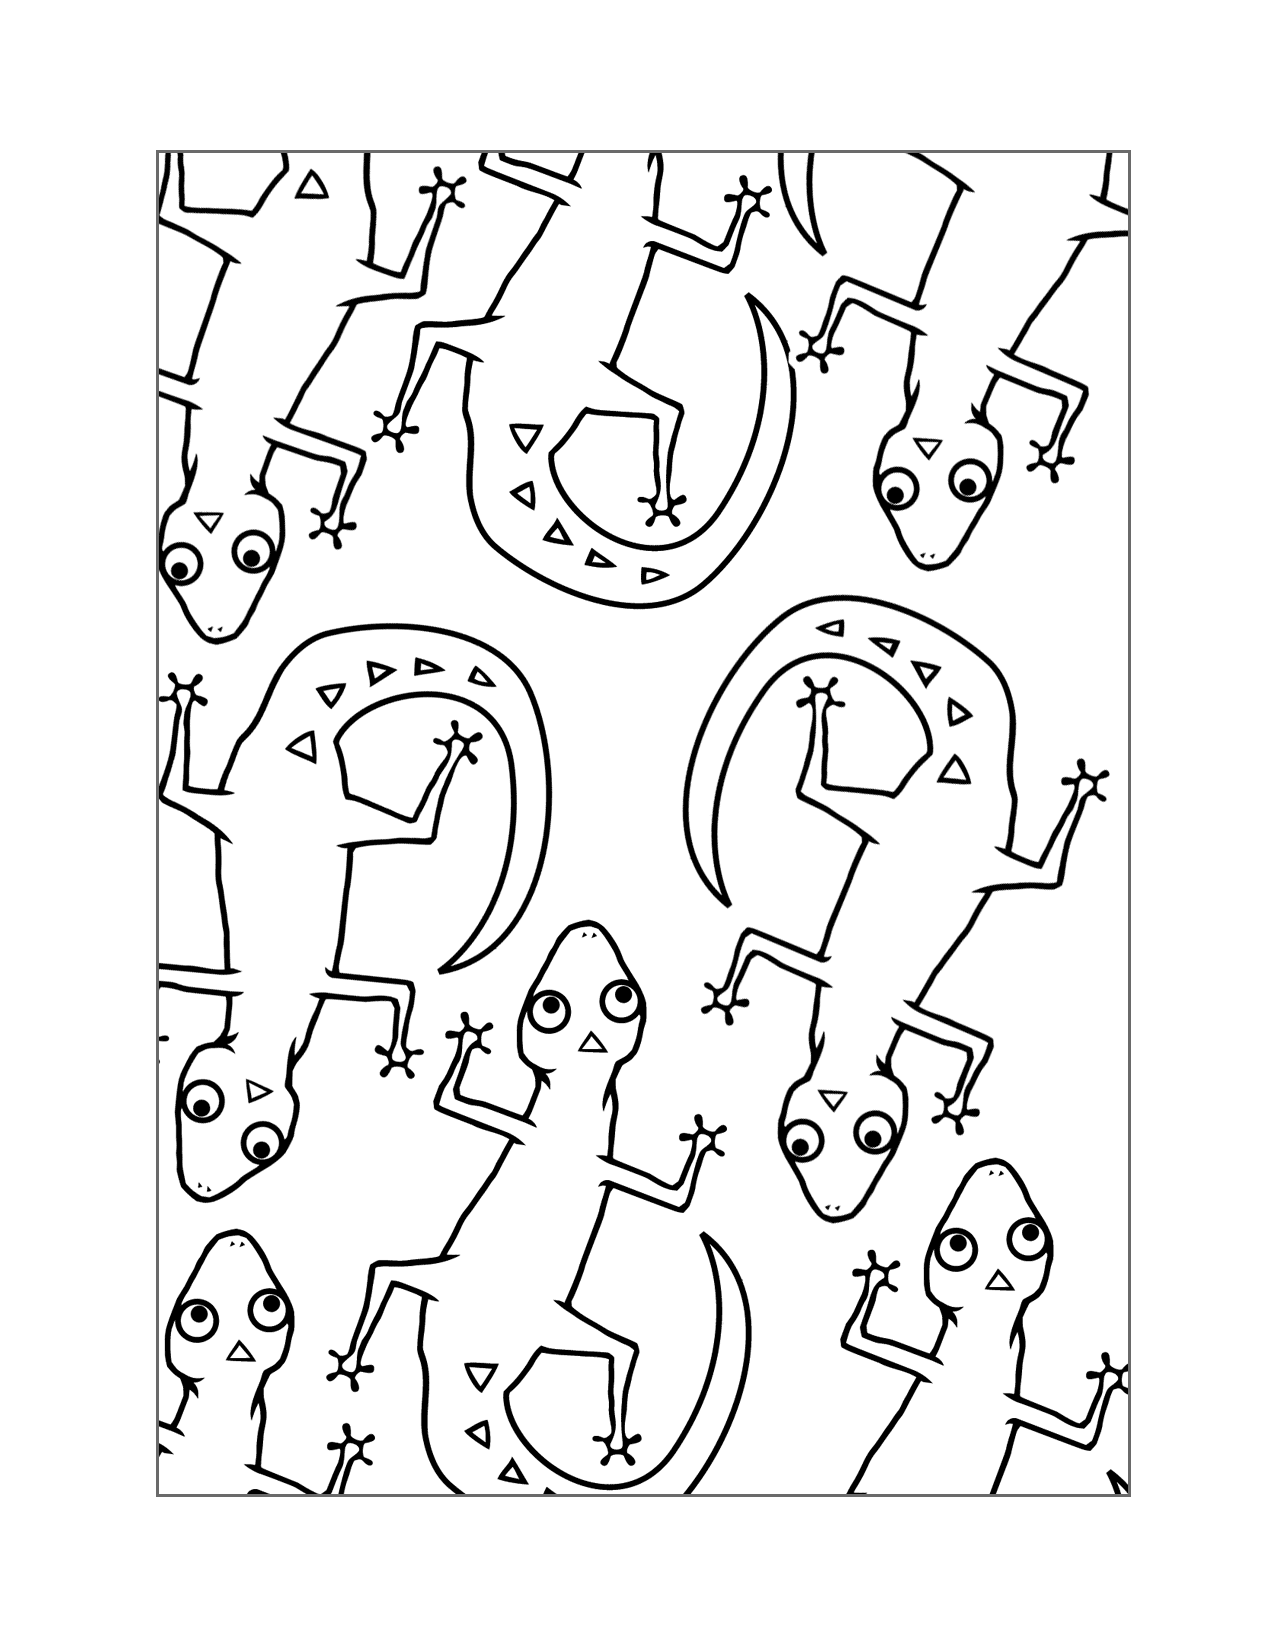 Lizard Pattern Coloring Page